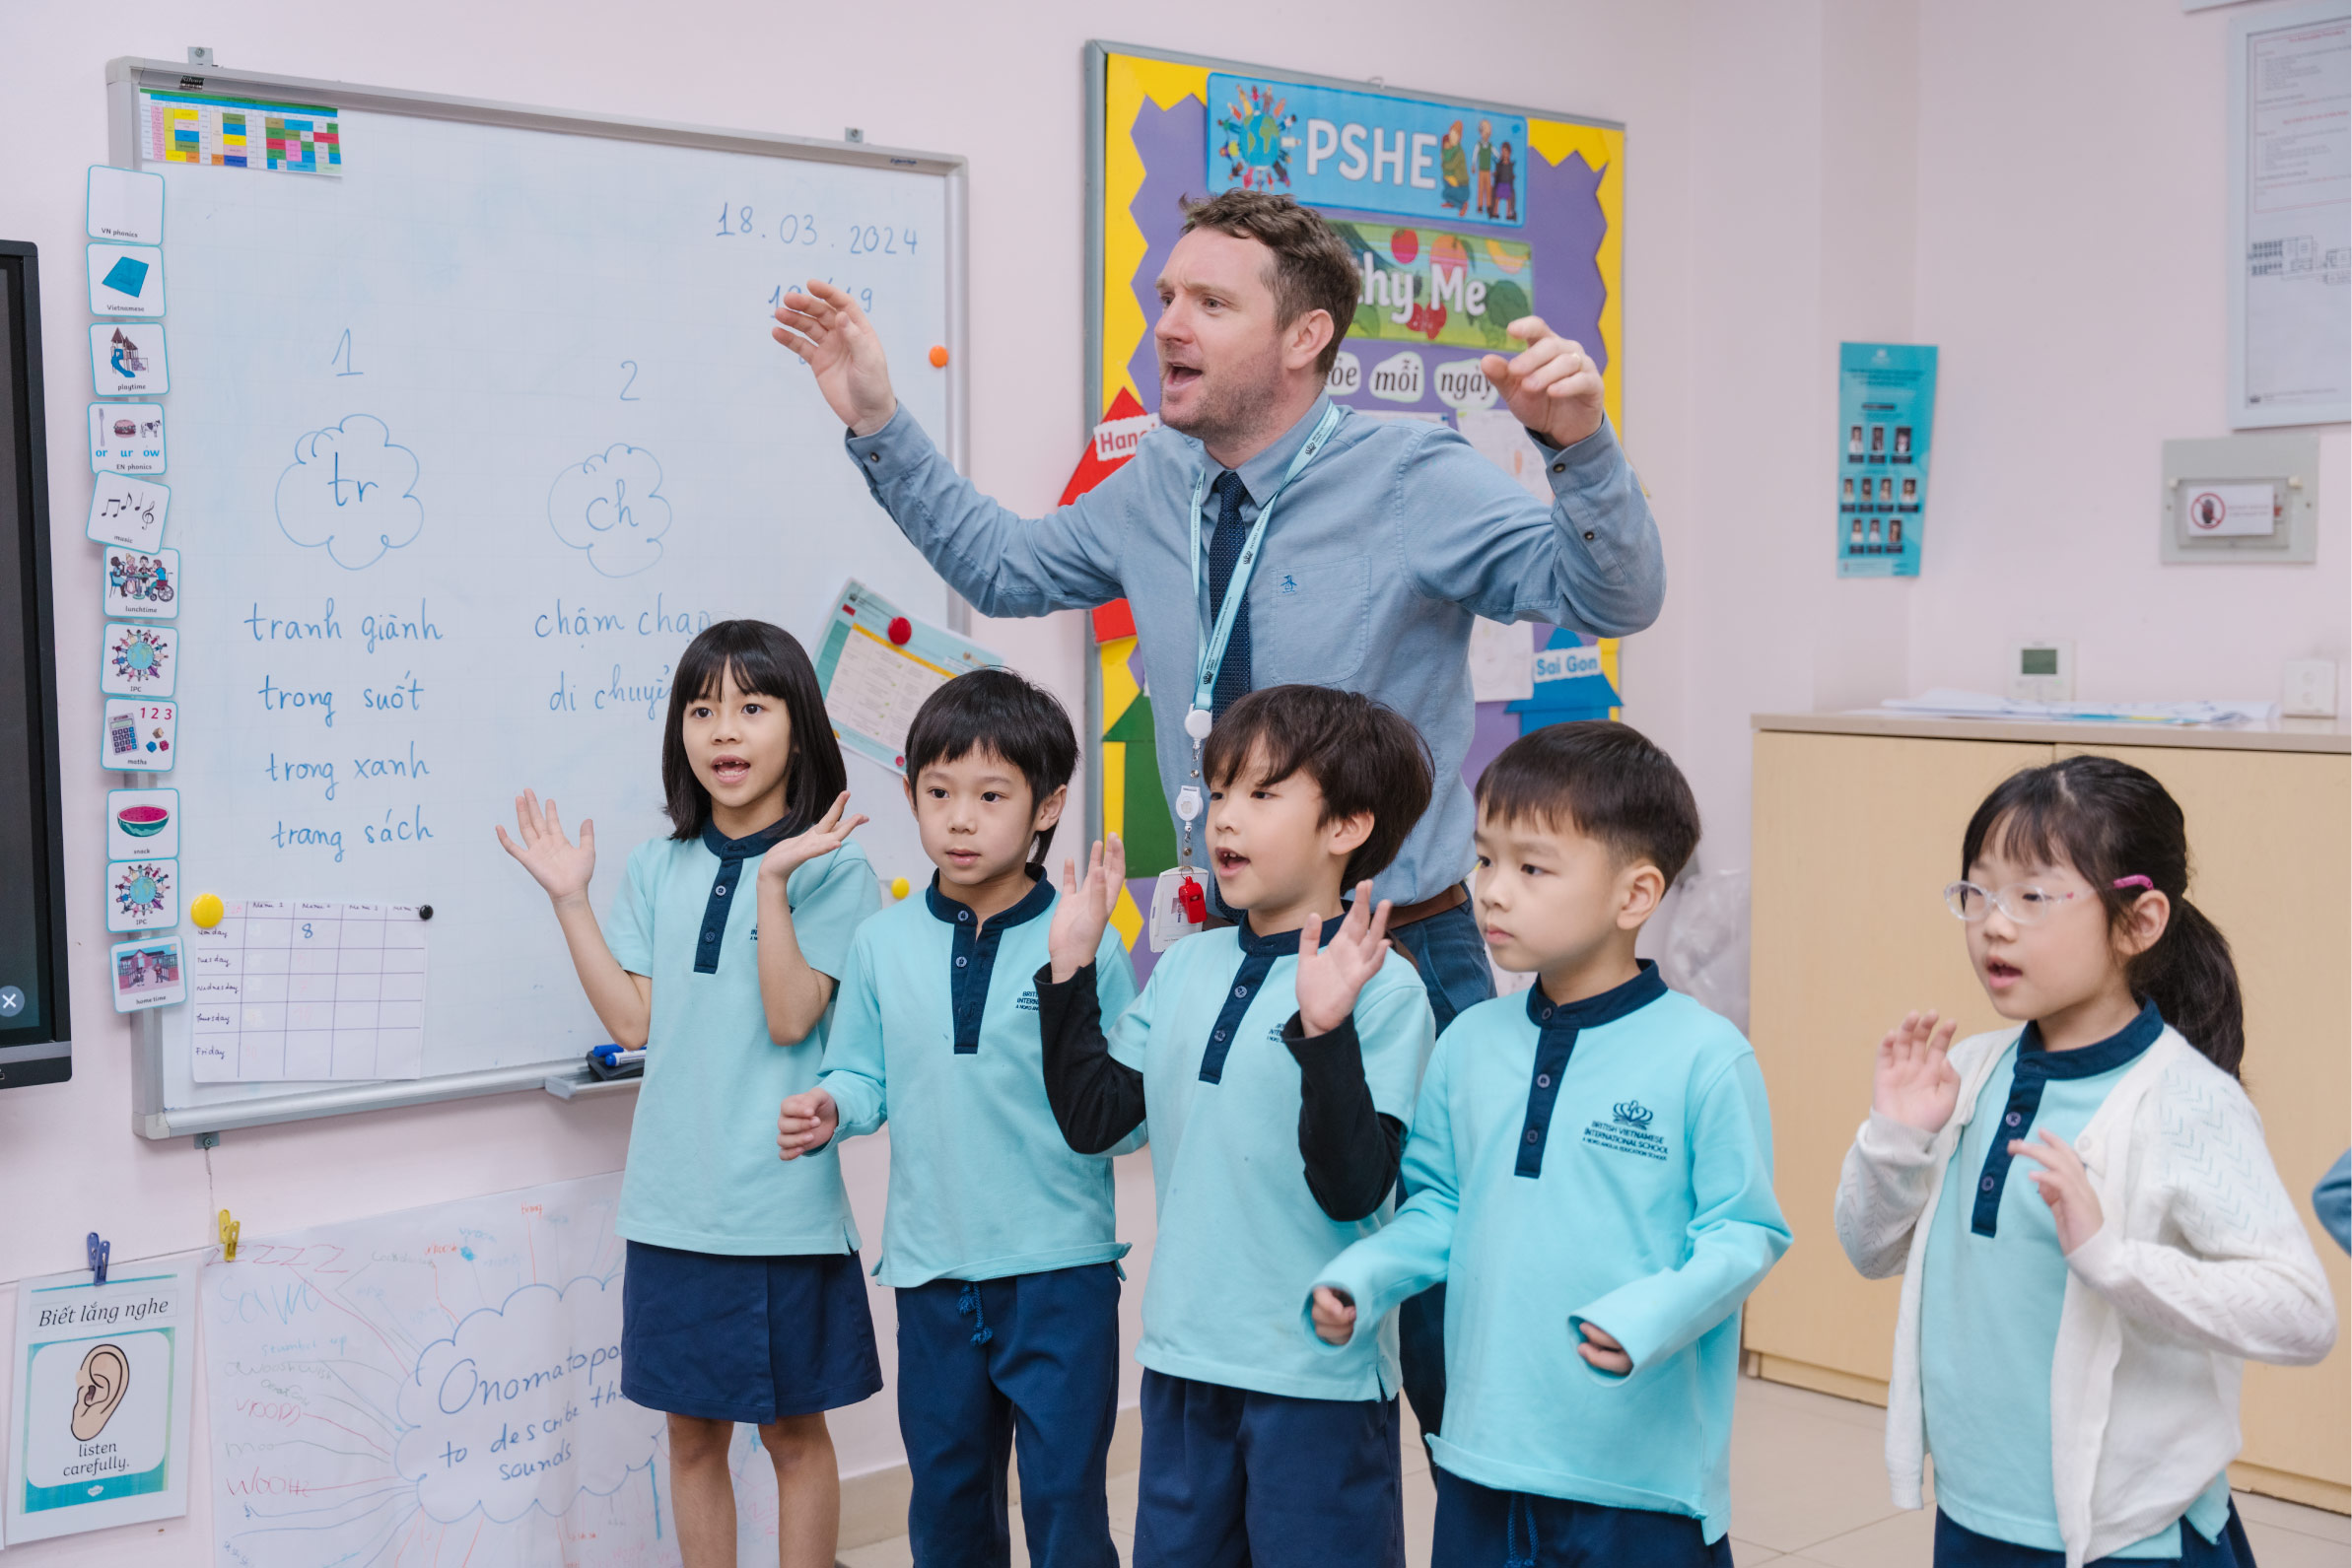 The power of wellbeing in education strengthens in Vietnam through Nord Anglia Education - The power of wellbeing in education strengthens in Vietnam through Nord Anglia Education